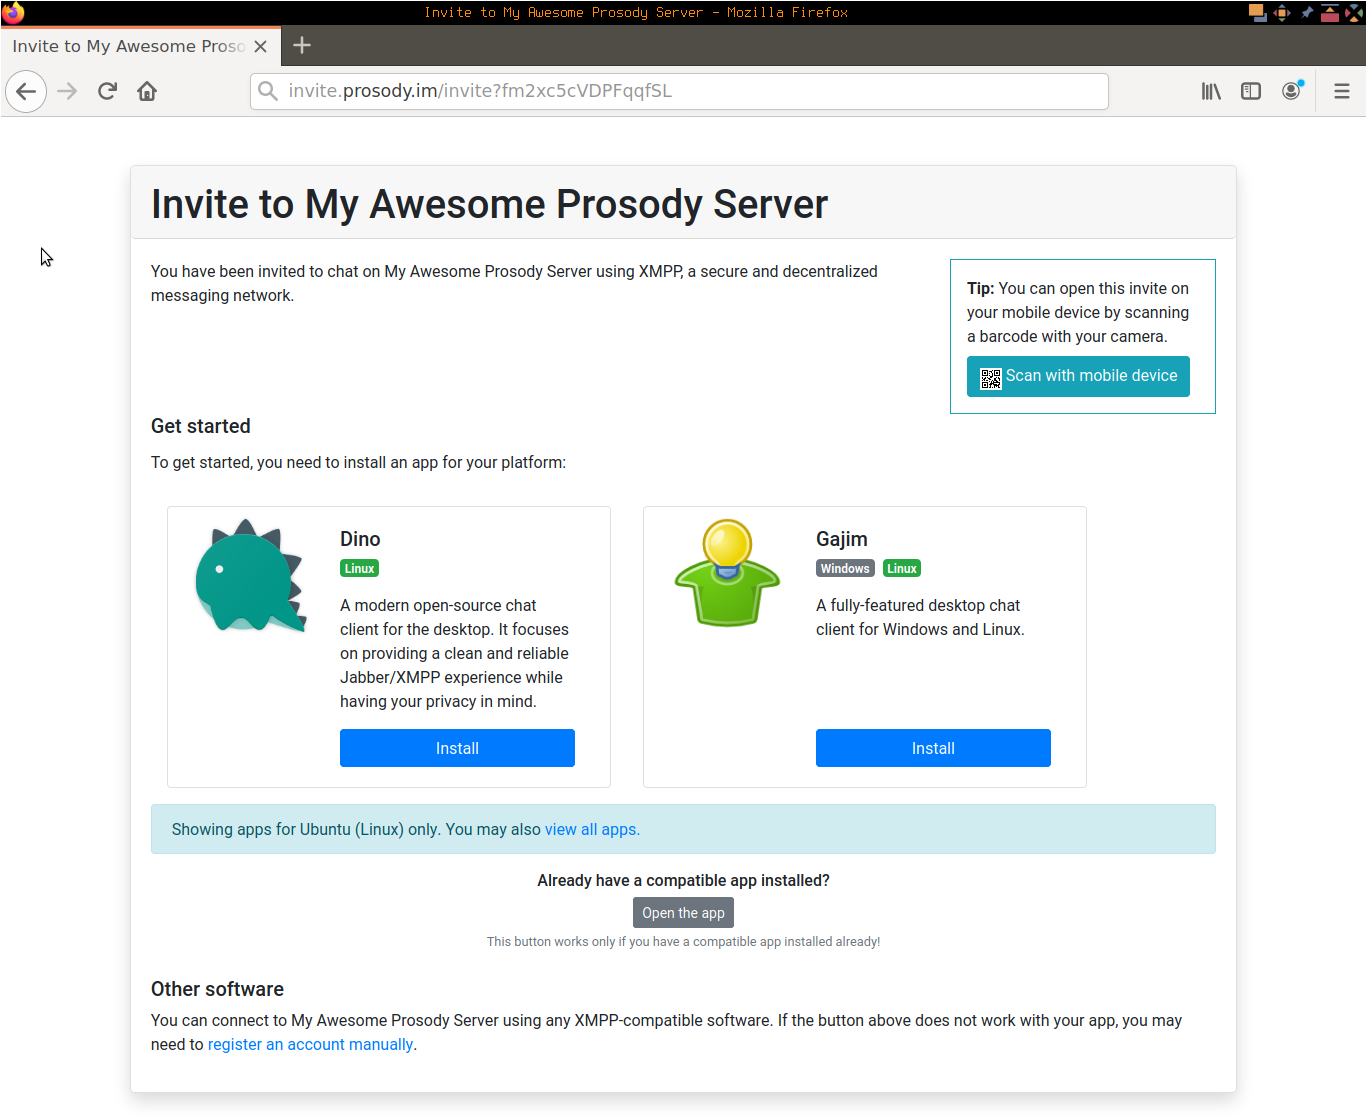 Screenshot-invite-page.png